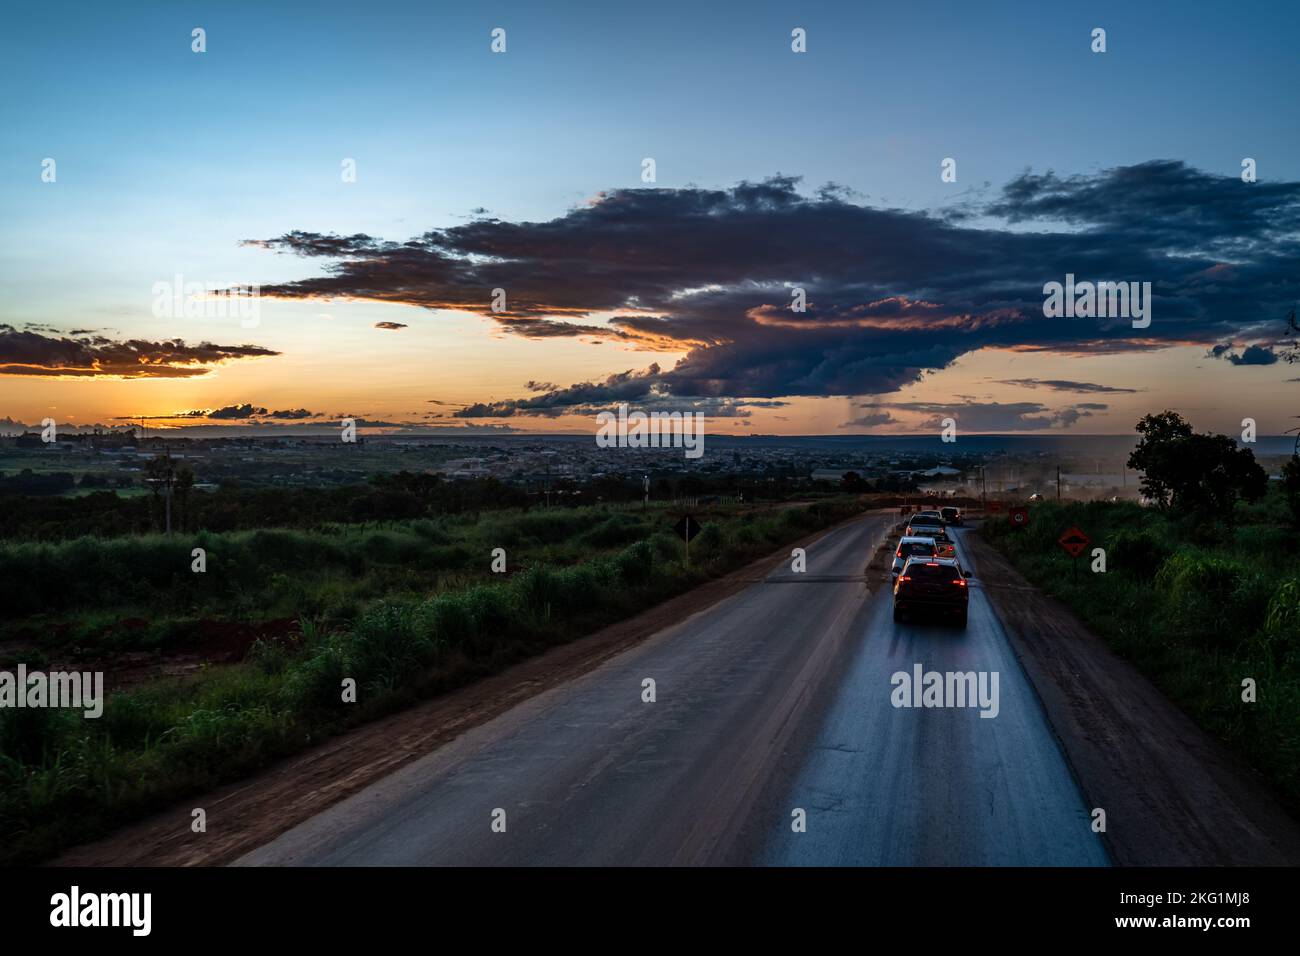 sunset over the road with cars Stock Photo